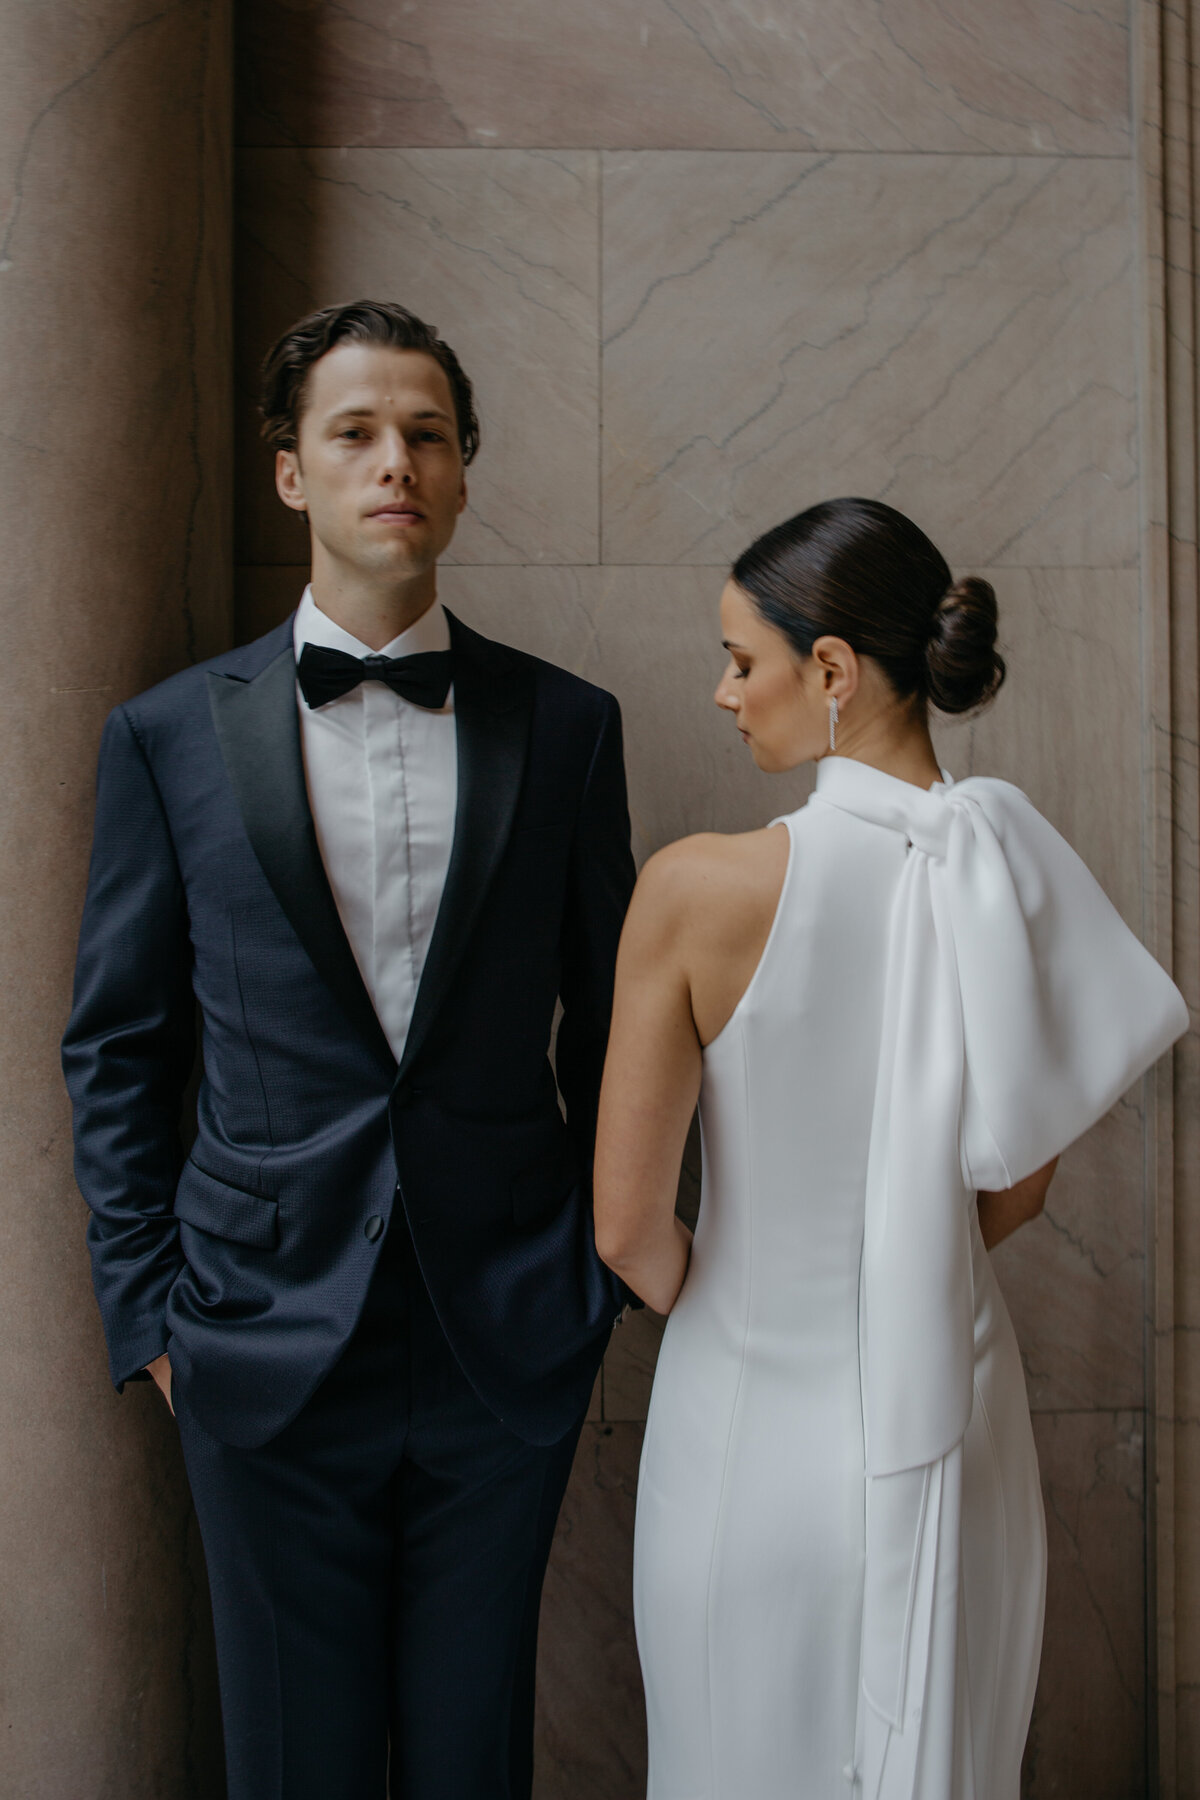 Groom in black tux facing forward with bride turned to side looking down against marble backdrop